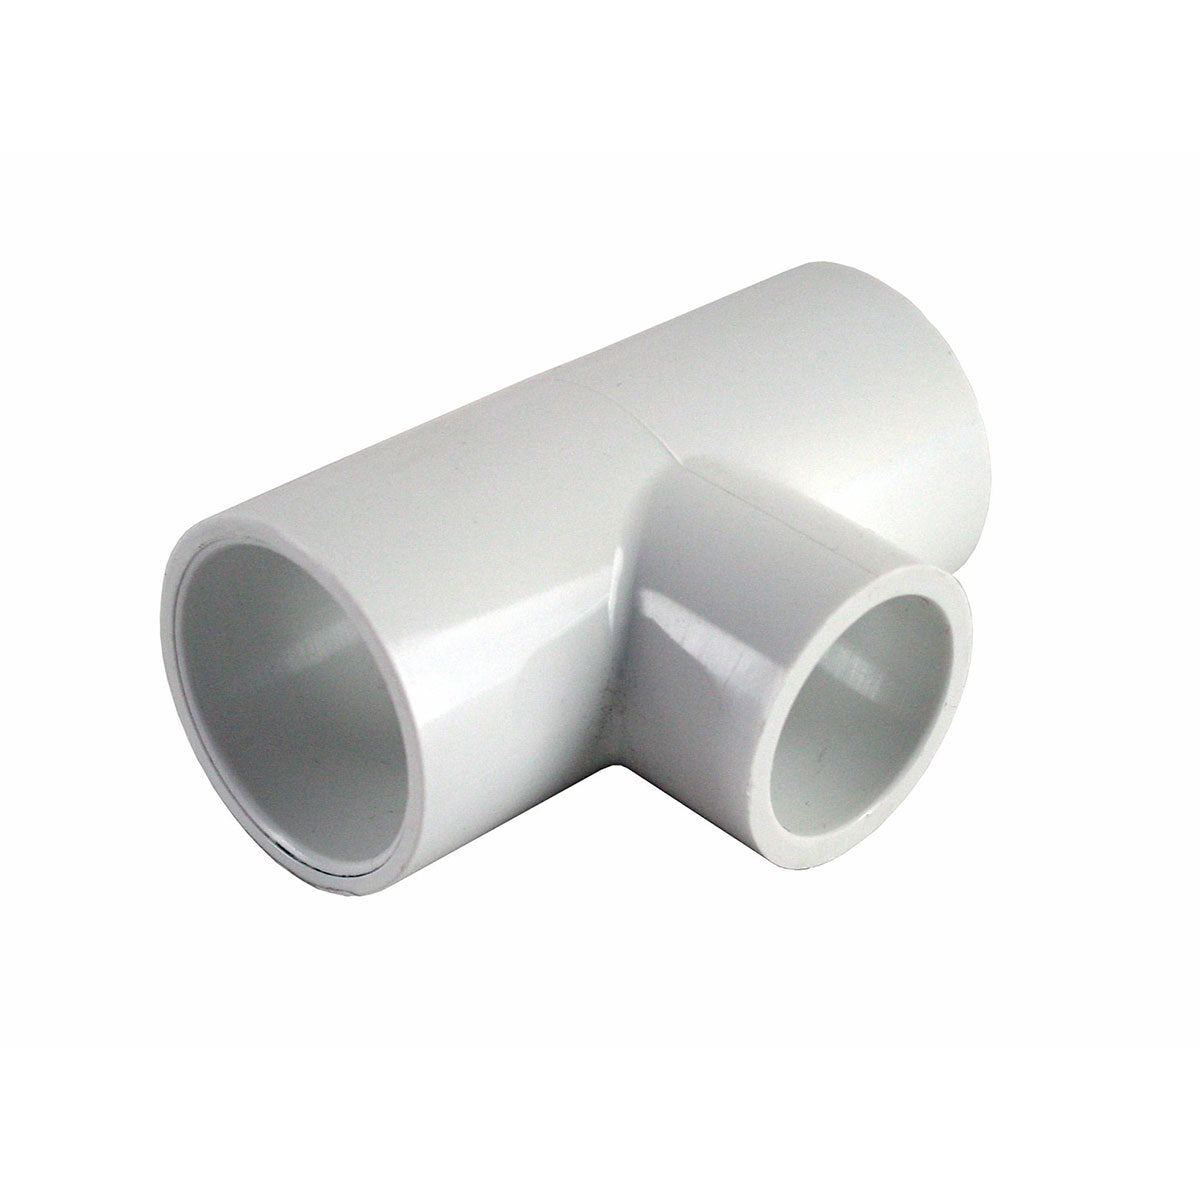 PVC Fitting Reducing Tee CL18 CAT19 AS1477